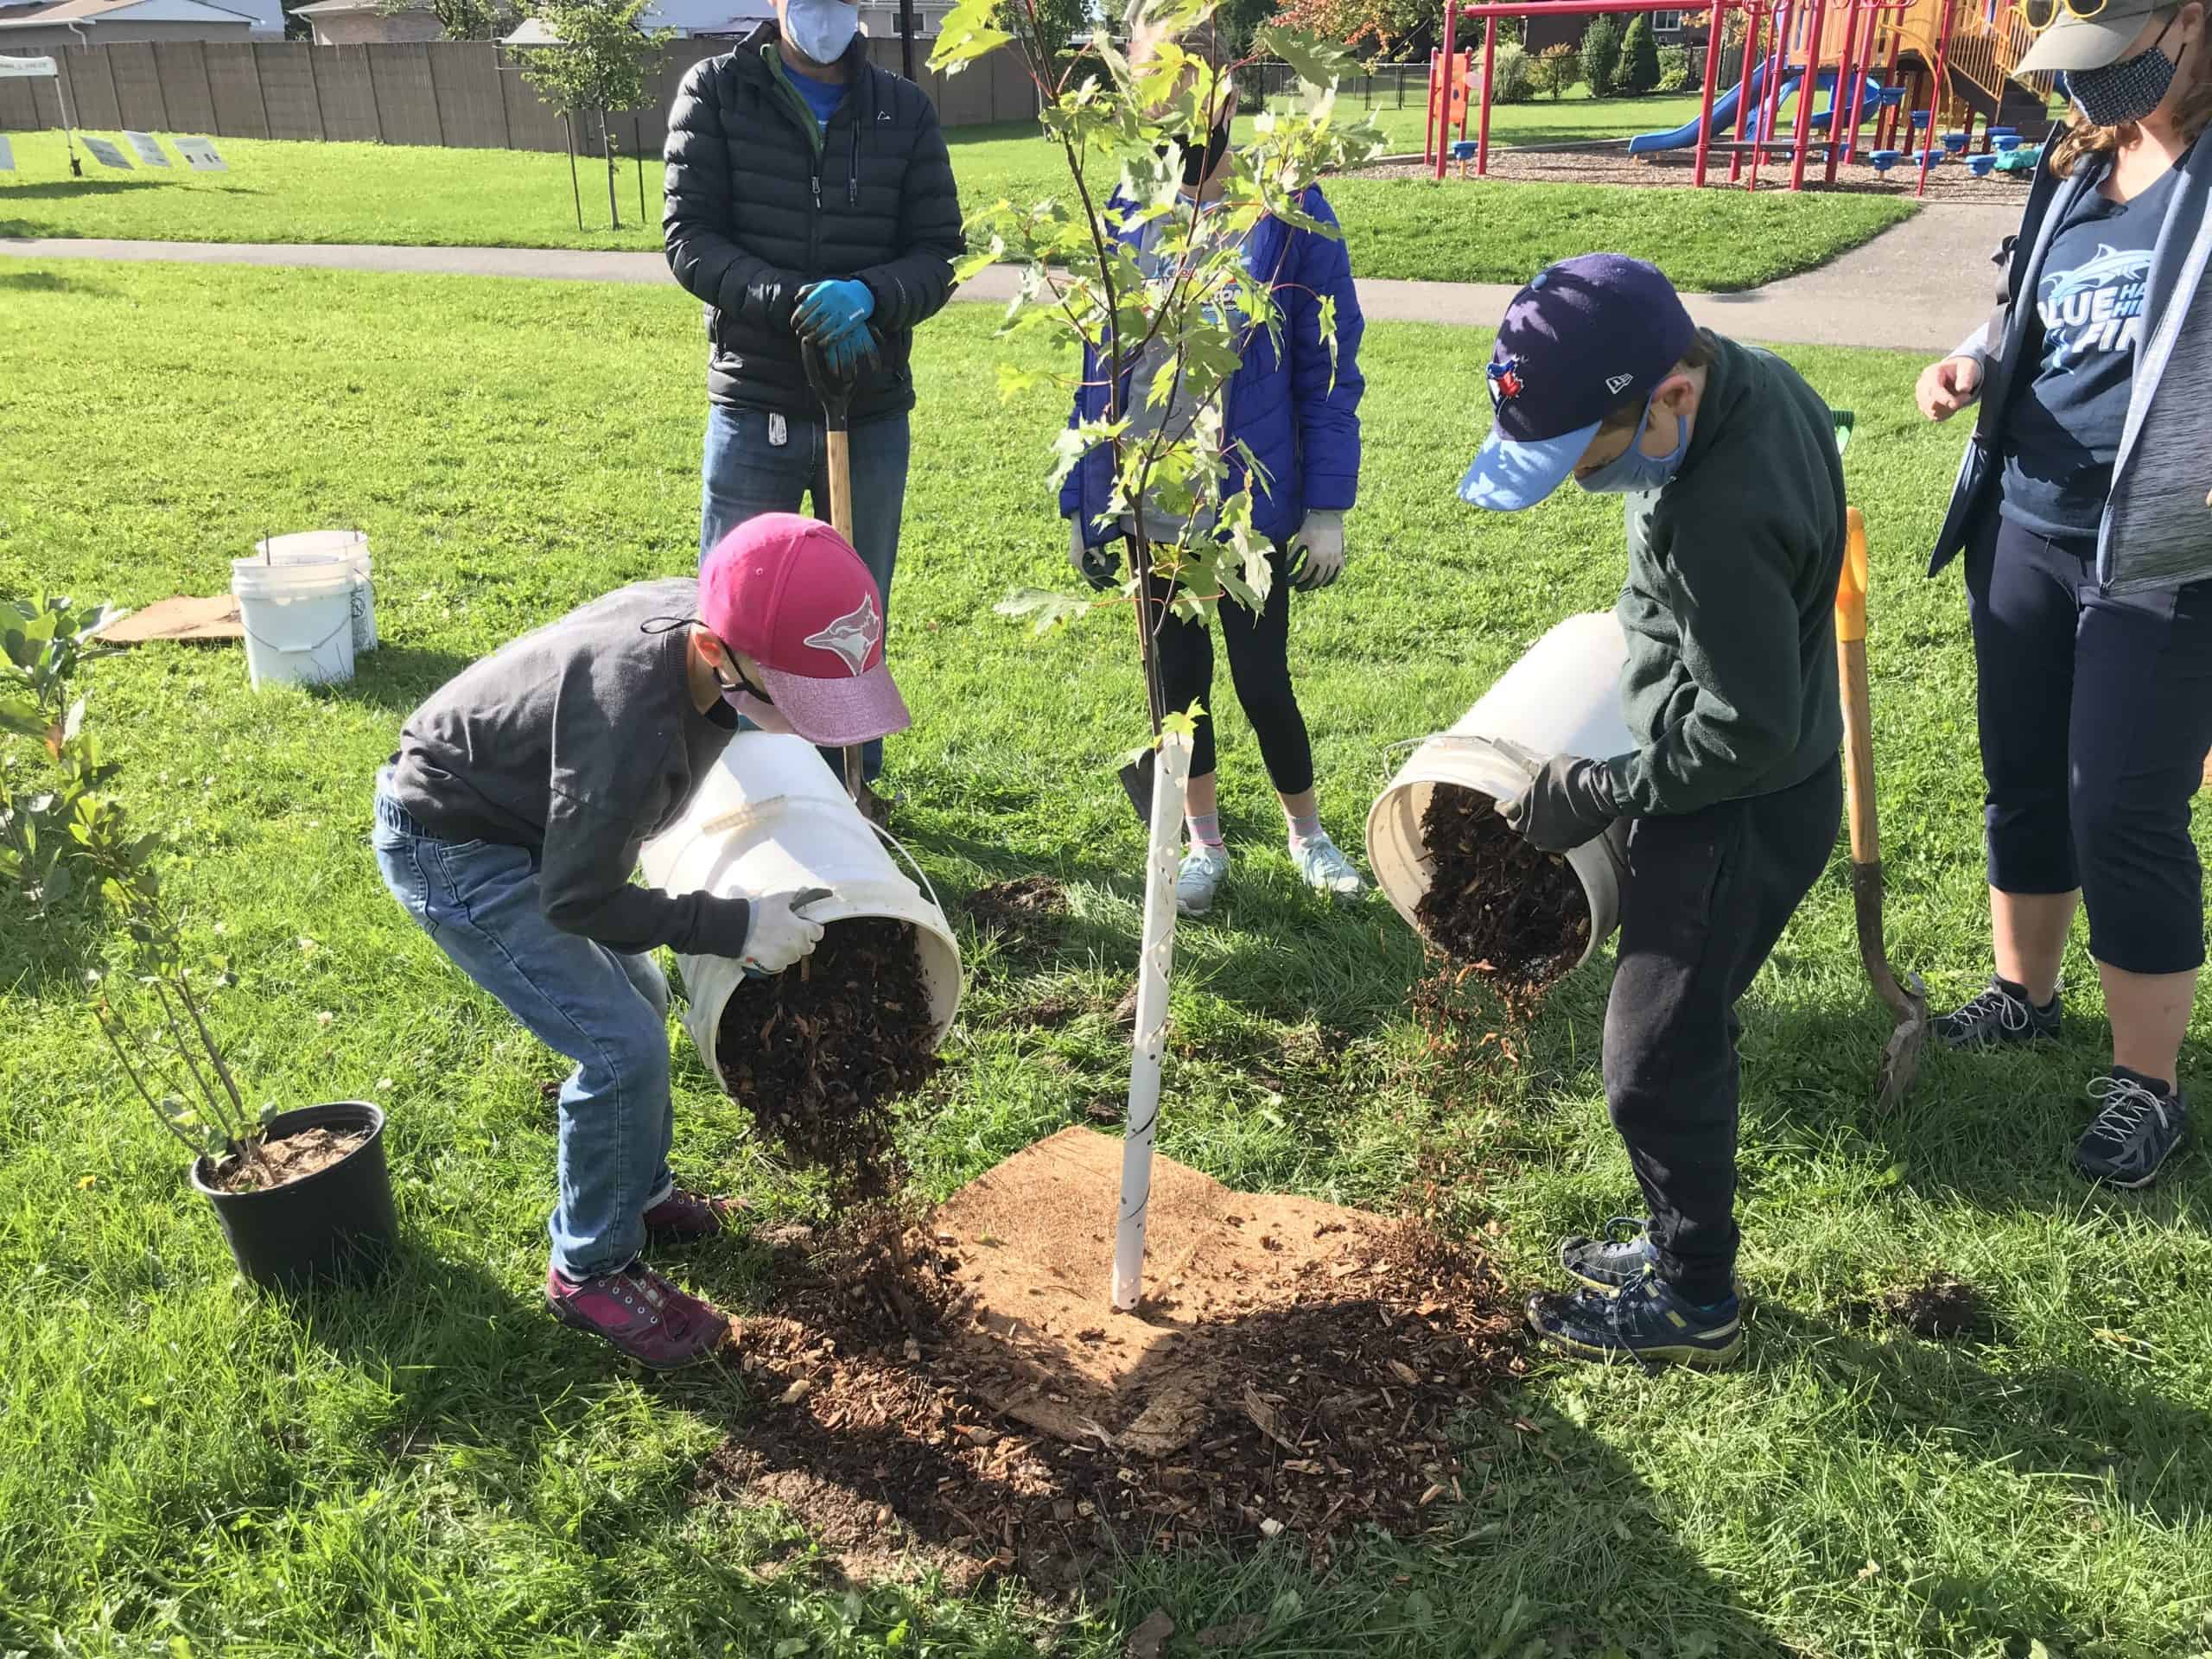 Children planting a tree, both pouring mulch at the base of the tree